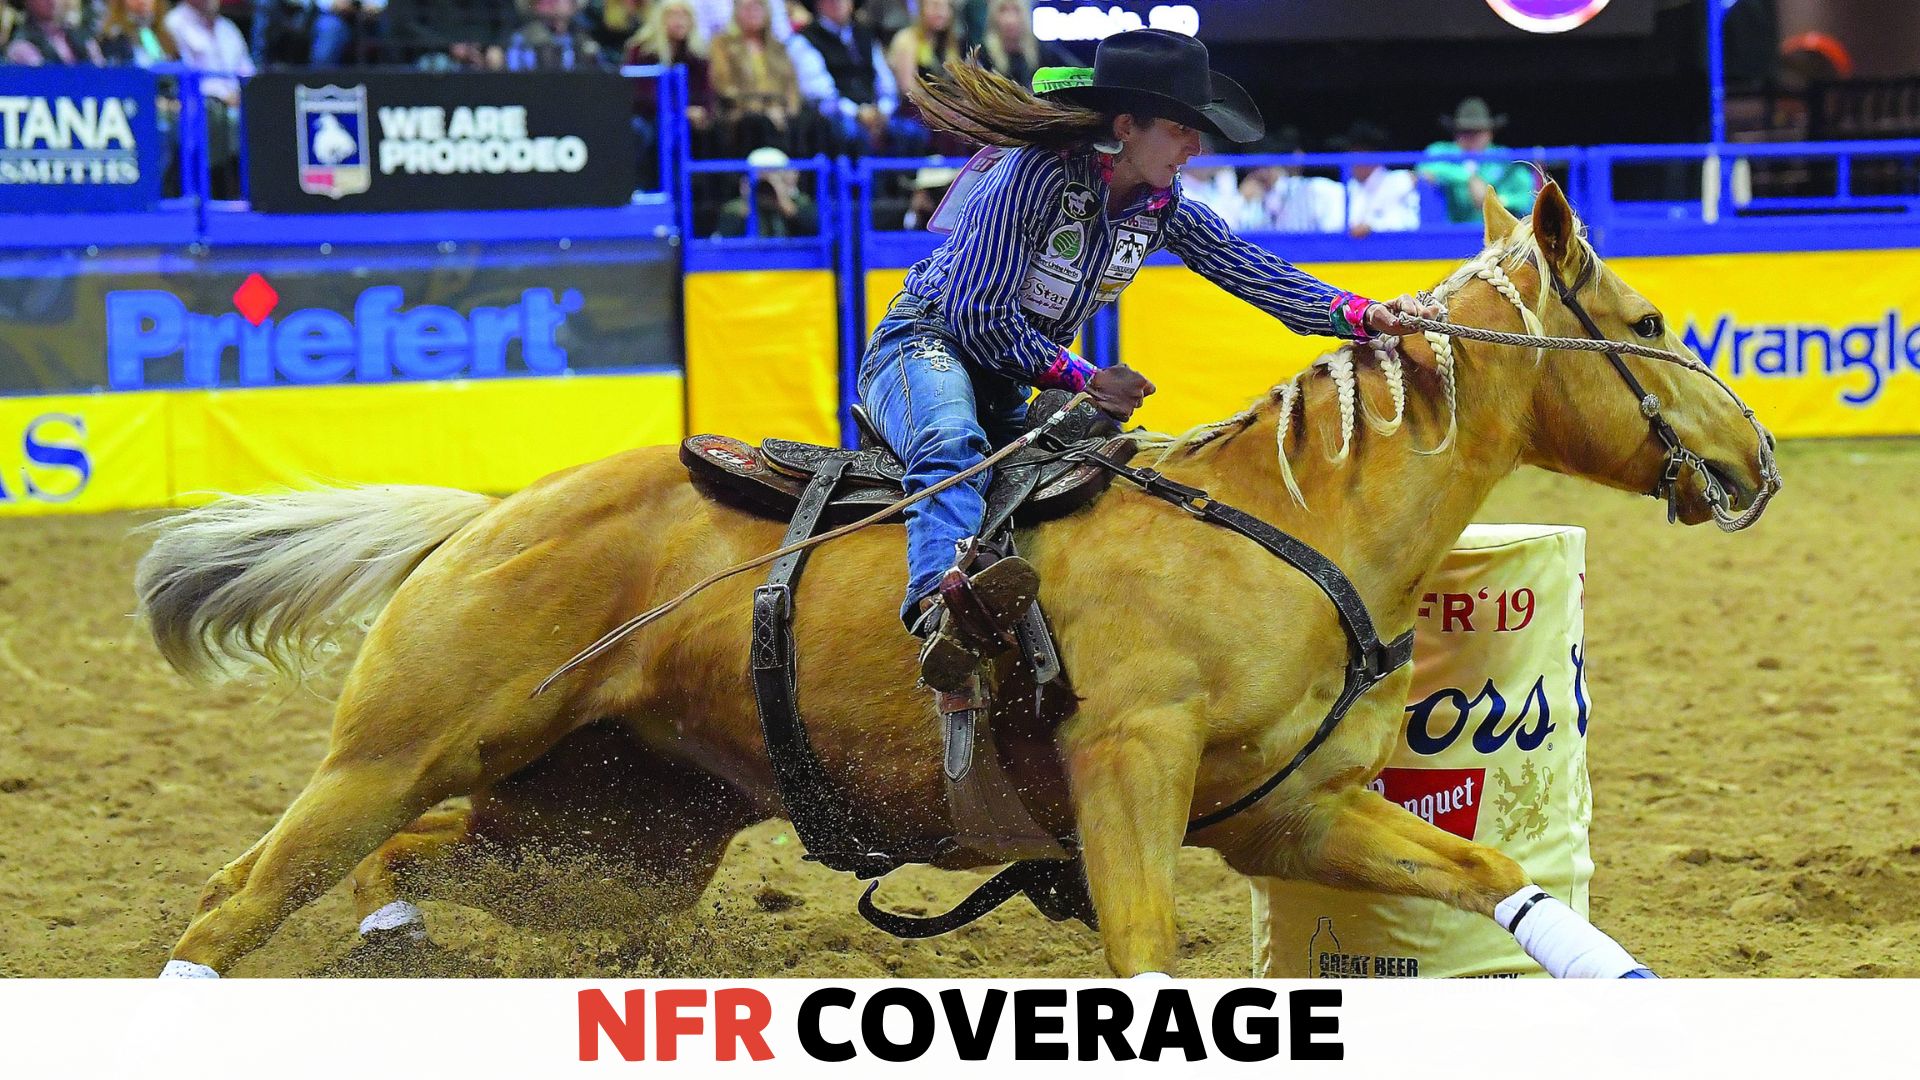 How to Qualify for Nfr Barrel Racing